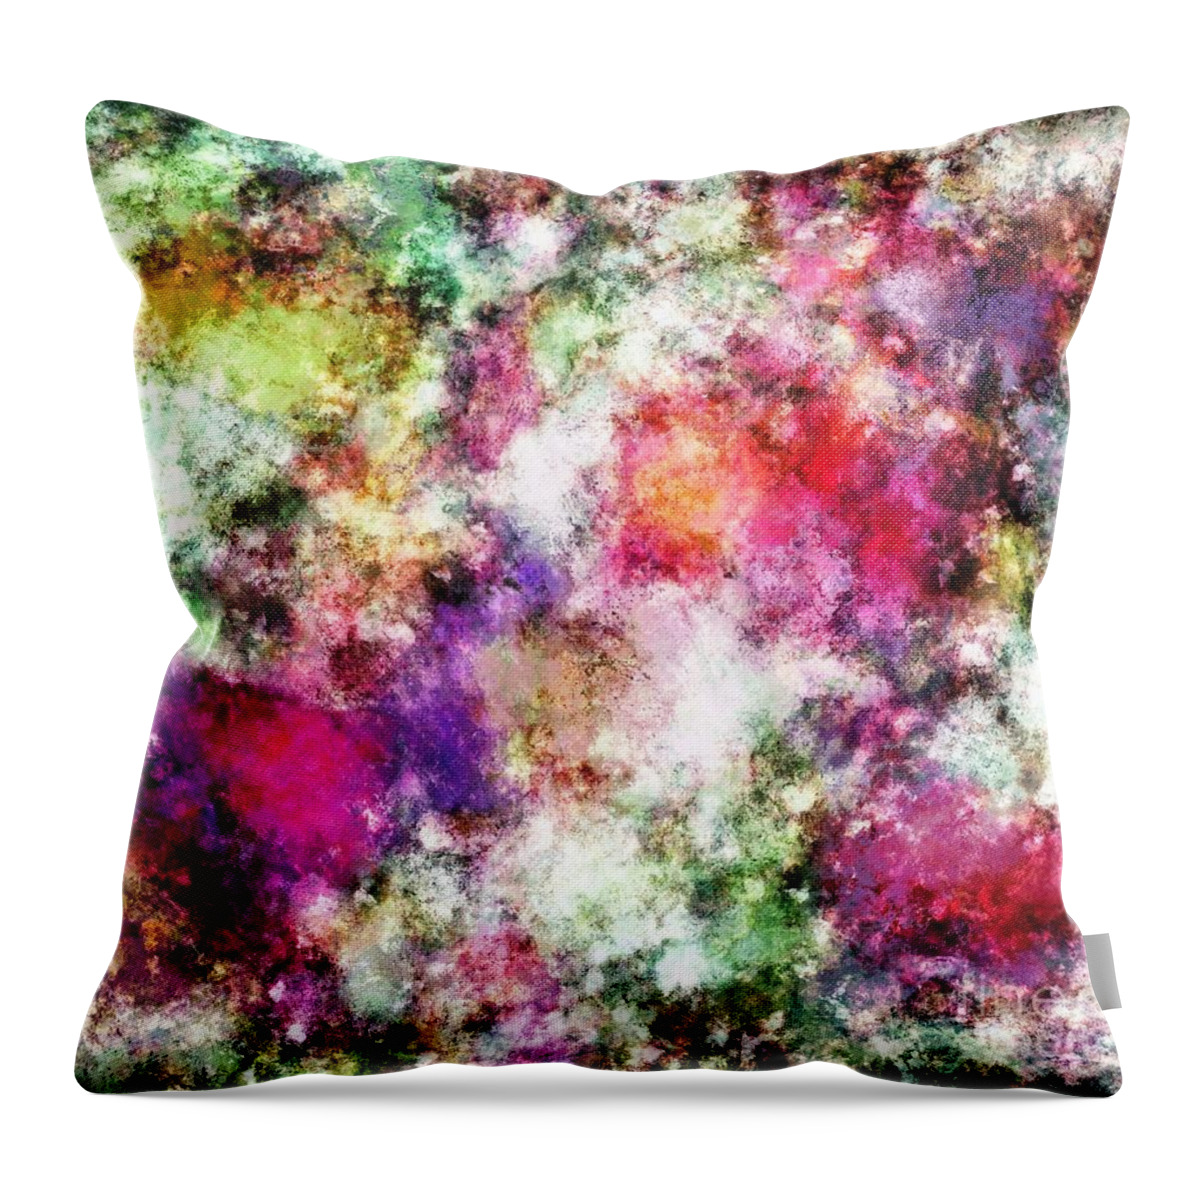 Red Throw Pillow featuring the digital art Generator by Keith Mills